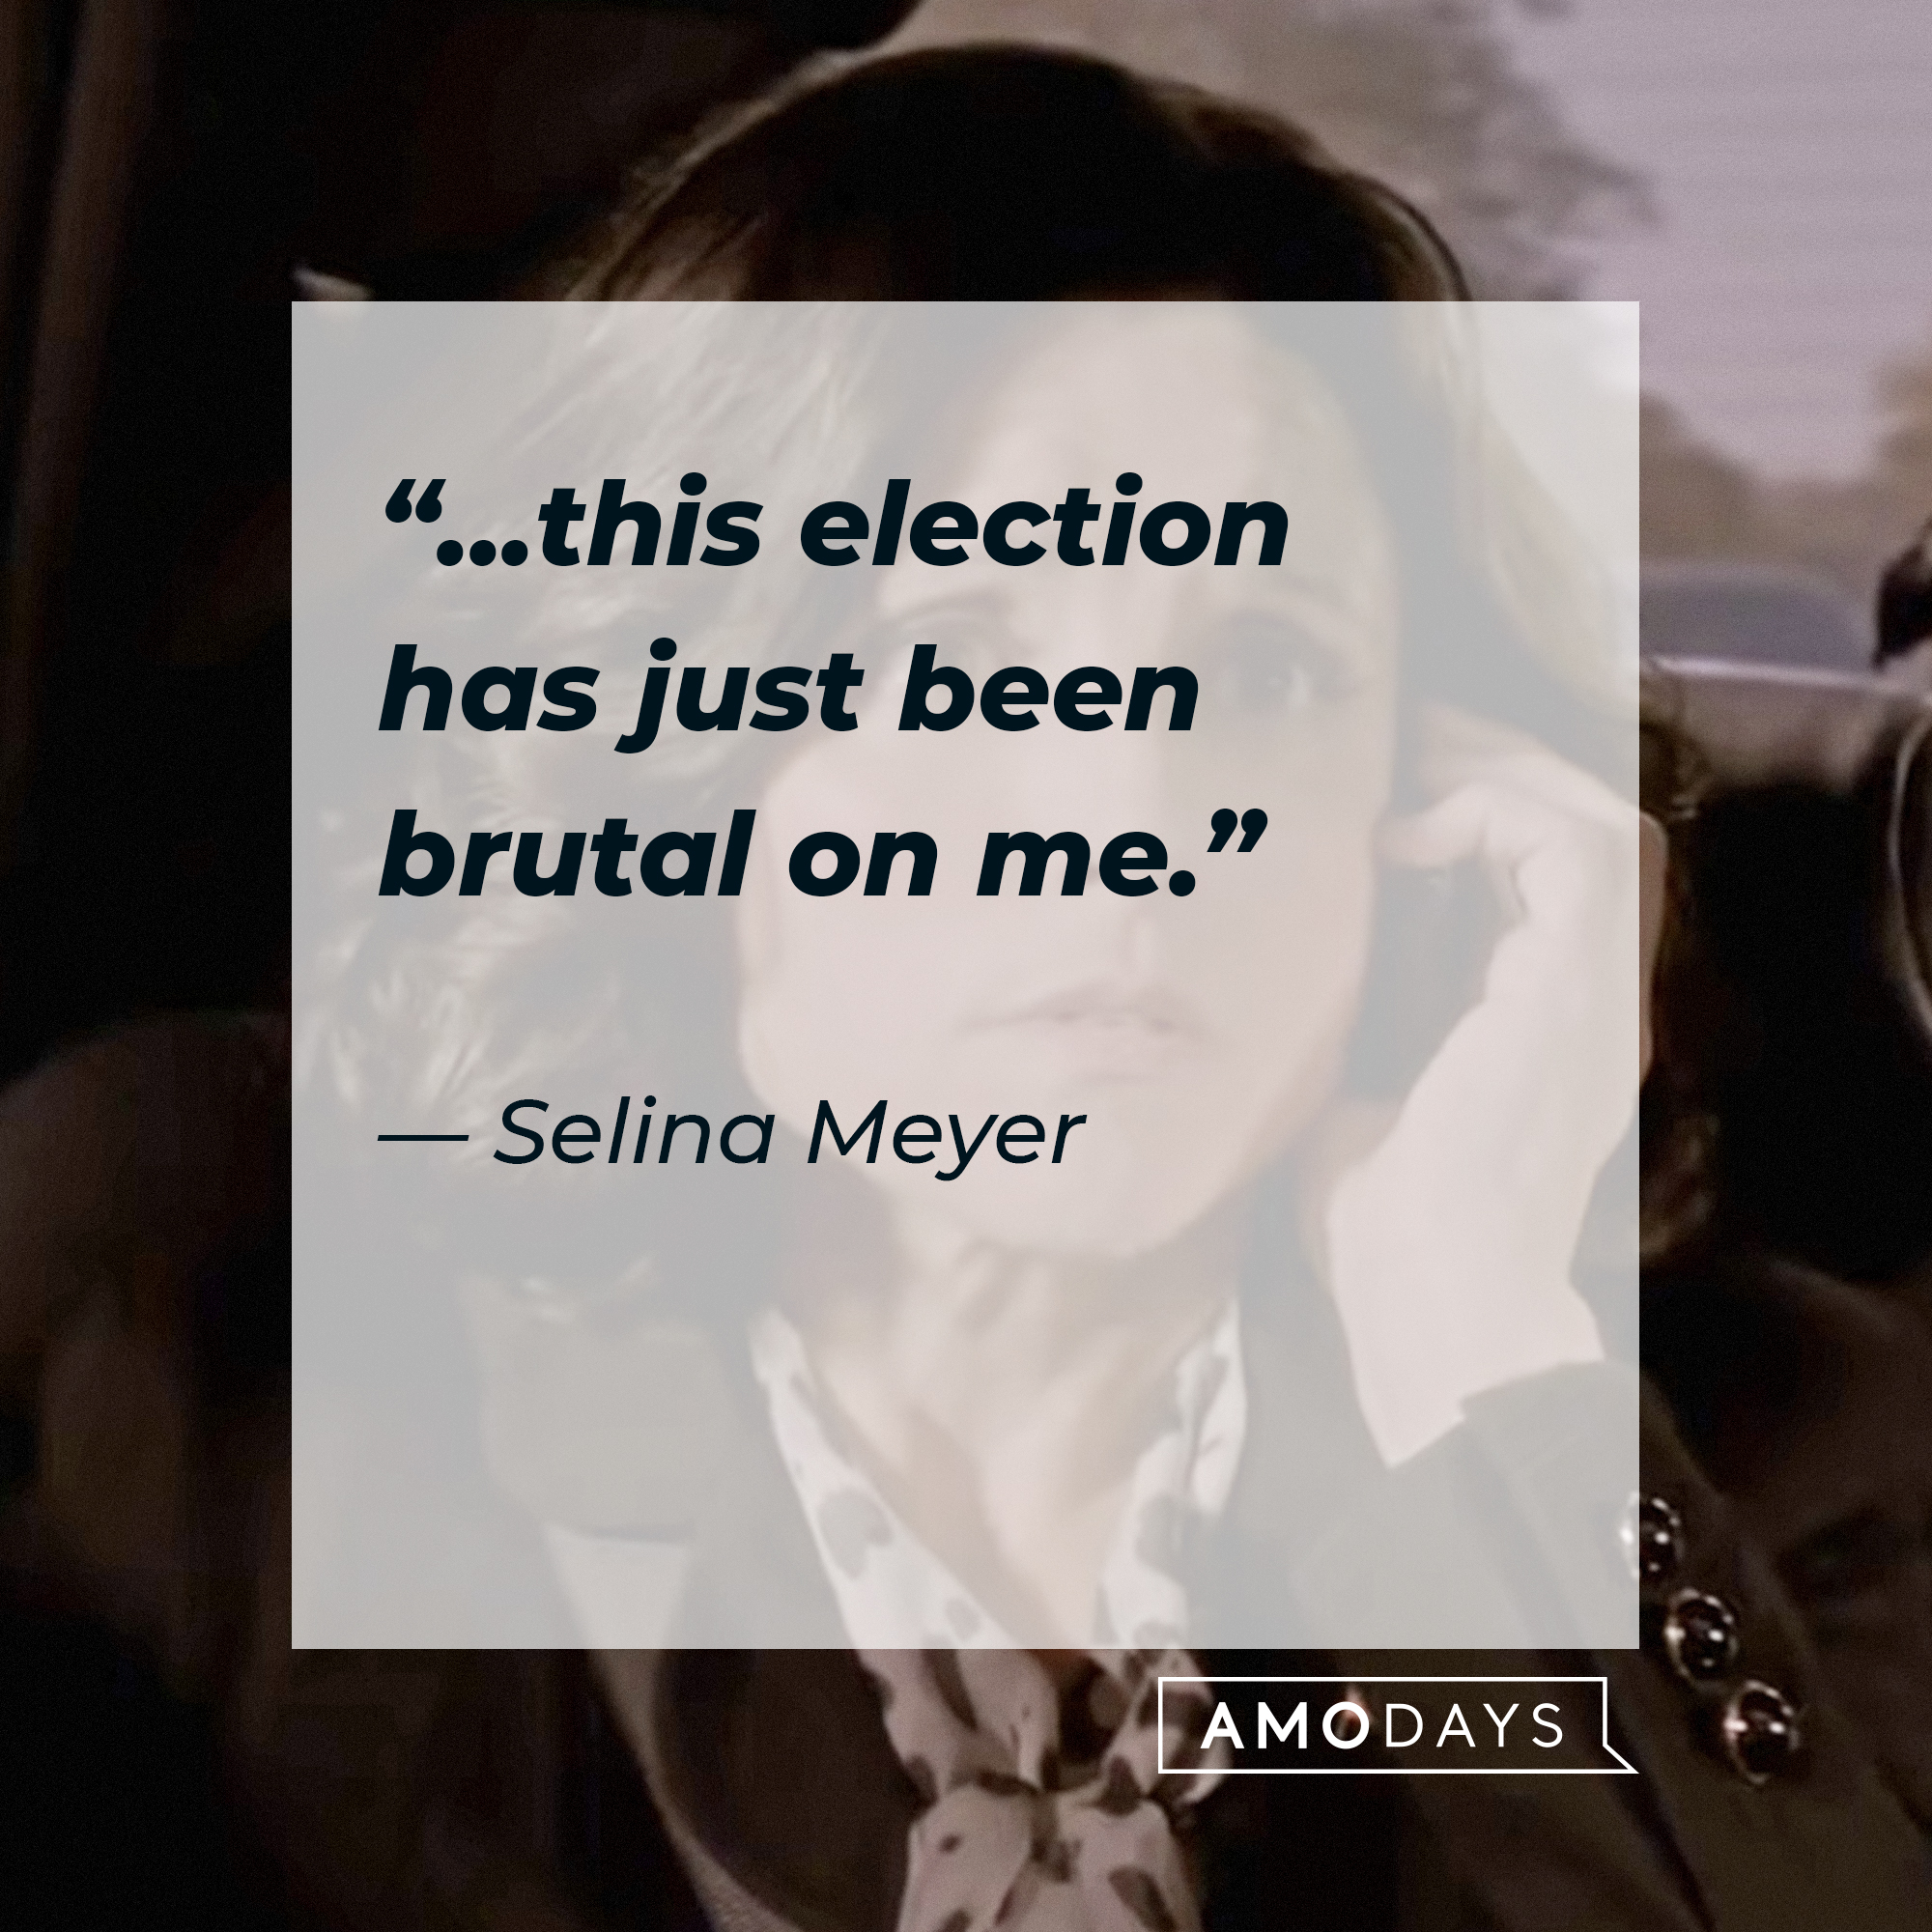 Selina Meyer, with her quote: “...this election has just been brutal on me.” │Source: youtube.com / Max